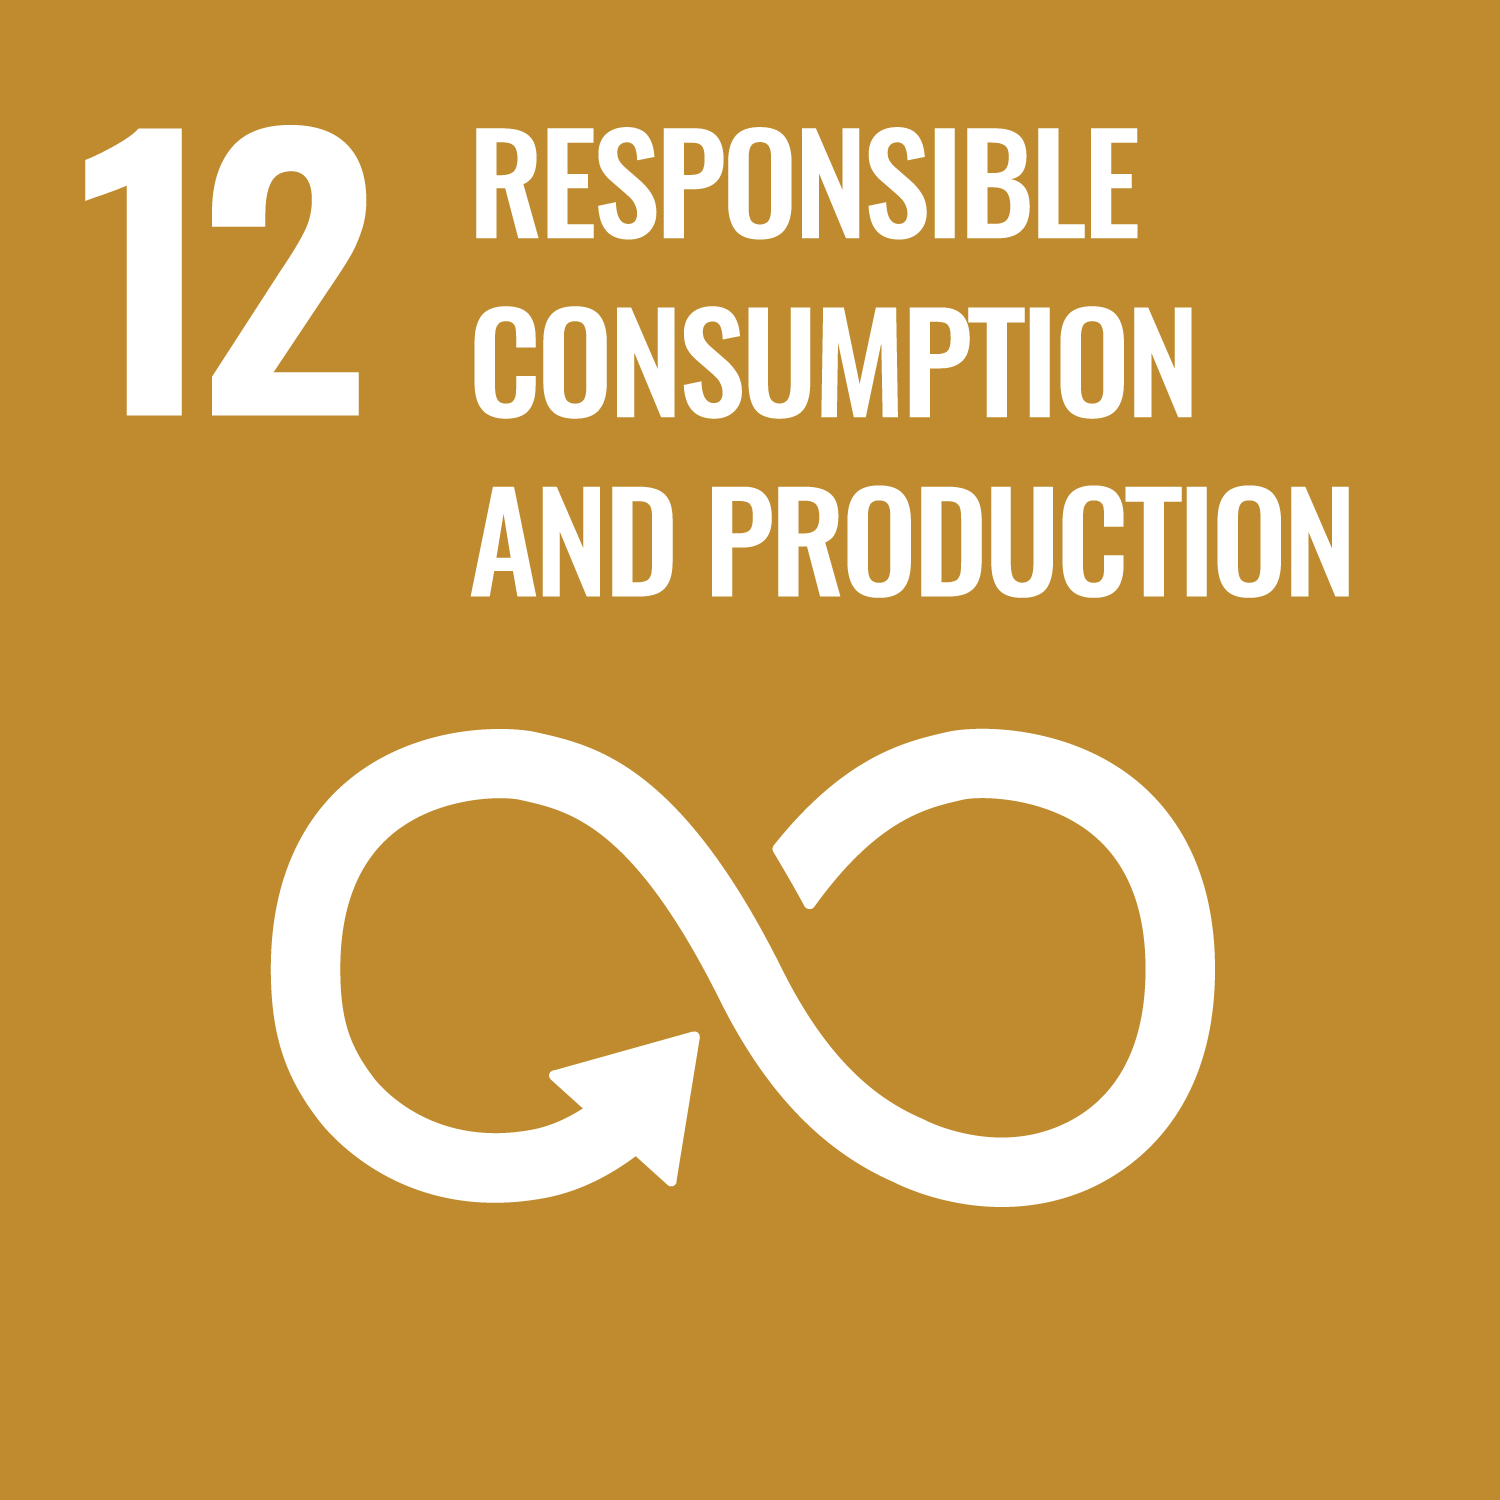 Sustainable Impact - Responsible Consumption and Production